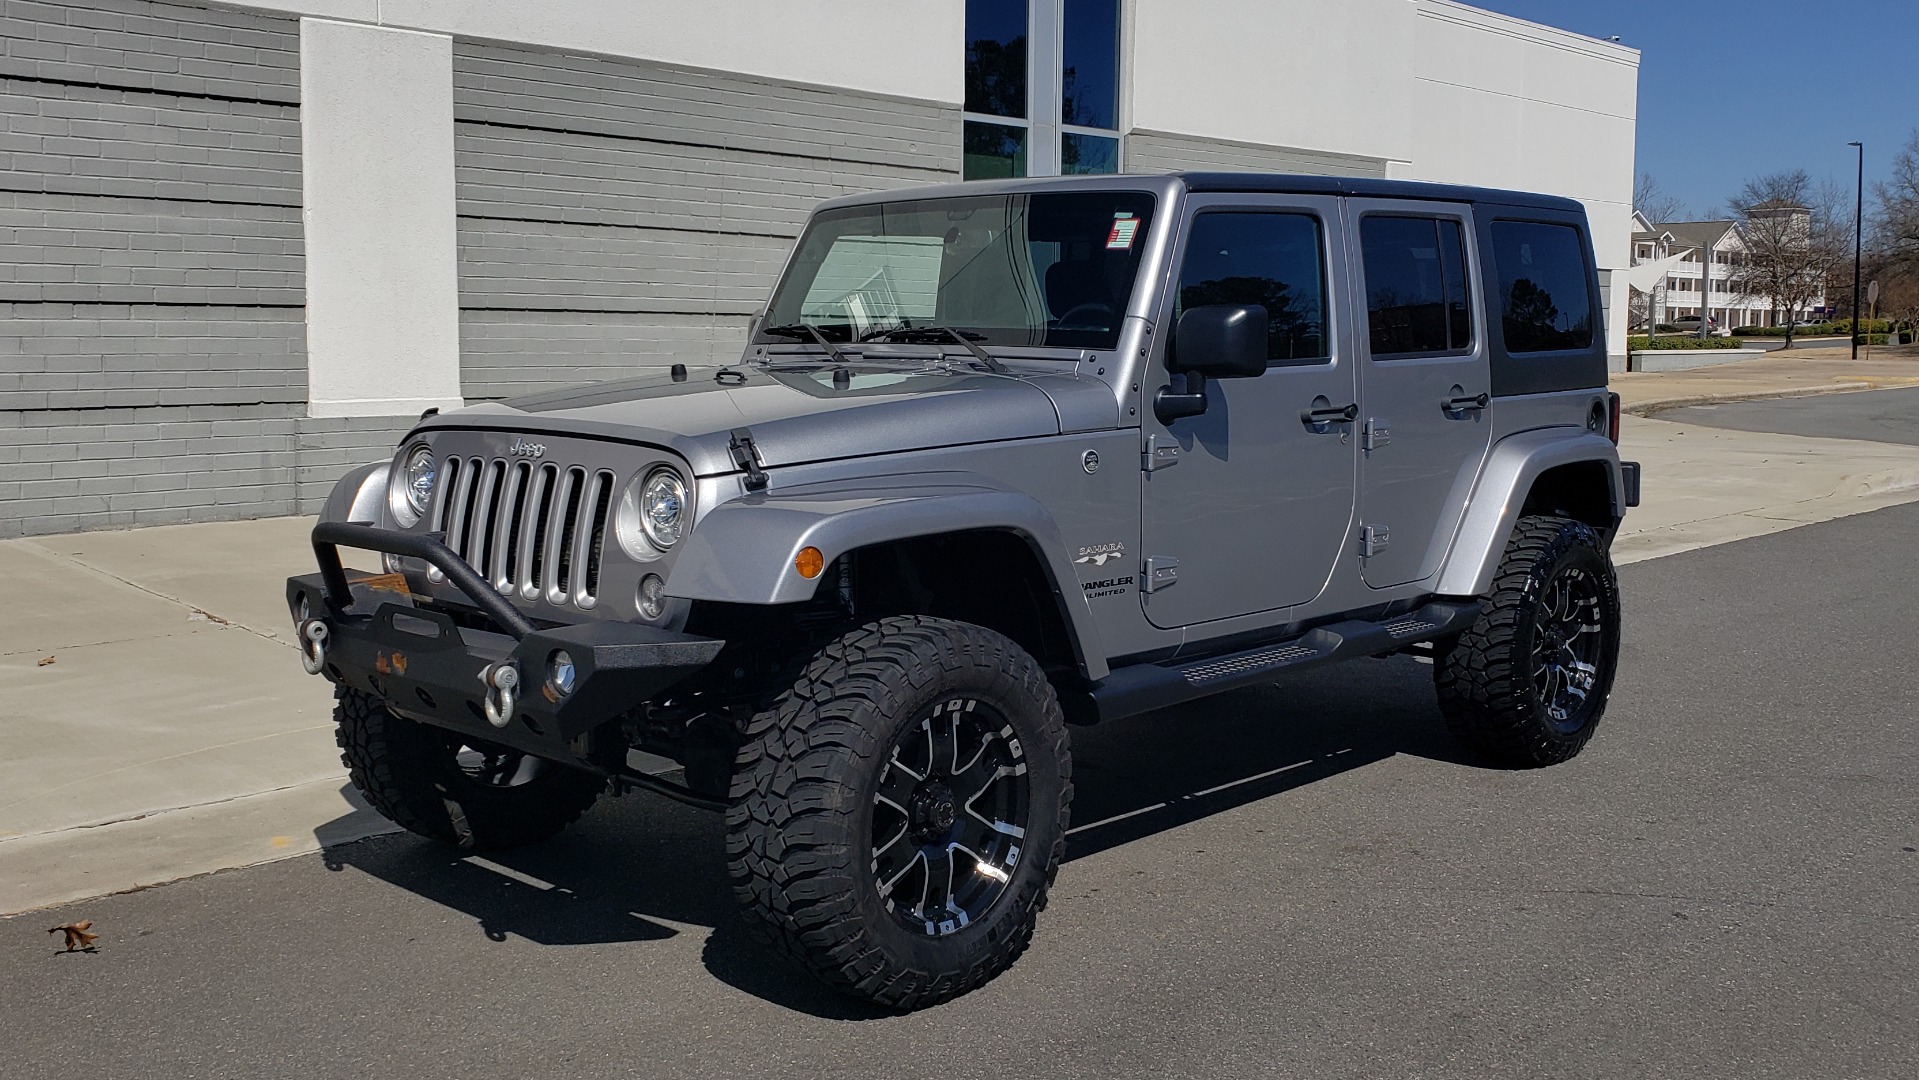 Used 2017 Jeep WRANGLER UNLIMITED SAHARA 4X4 / 3-PC FREEDOM TOP / 3.6L V6 / 5-SPD AUTO for sale Sold at Formula Imports in Charlotte NC 28227 2